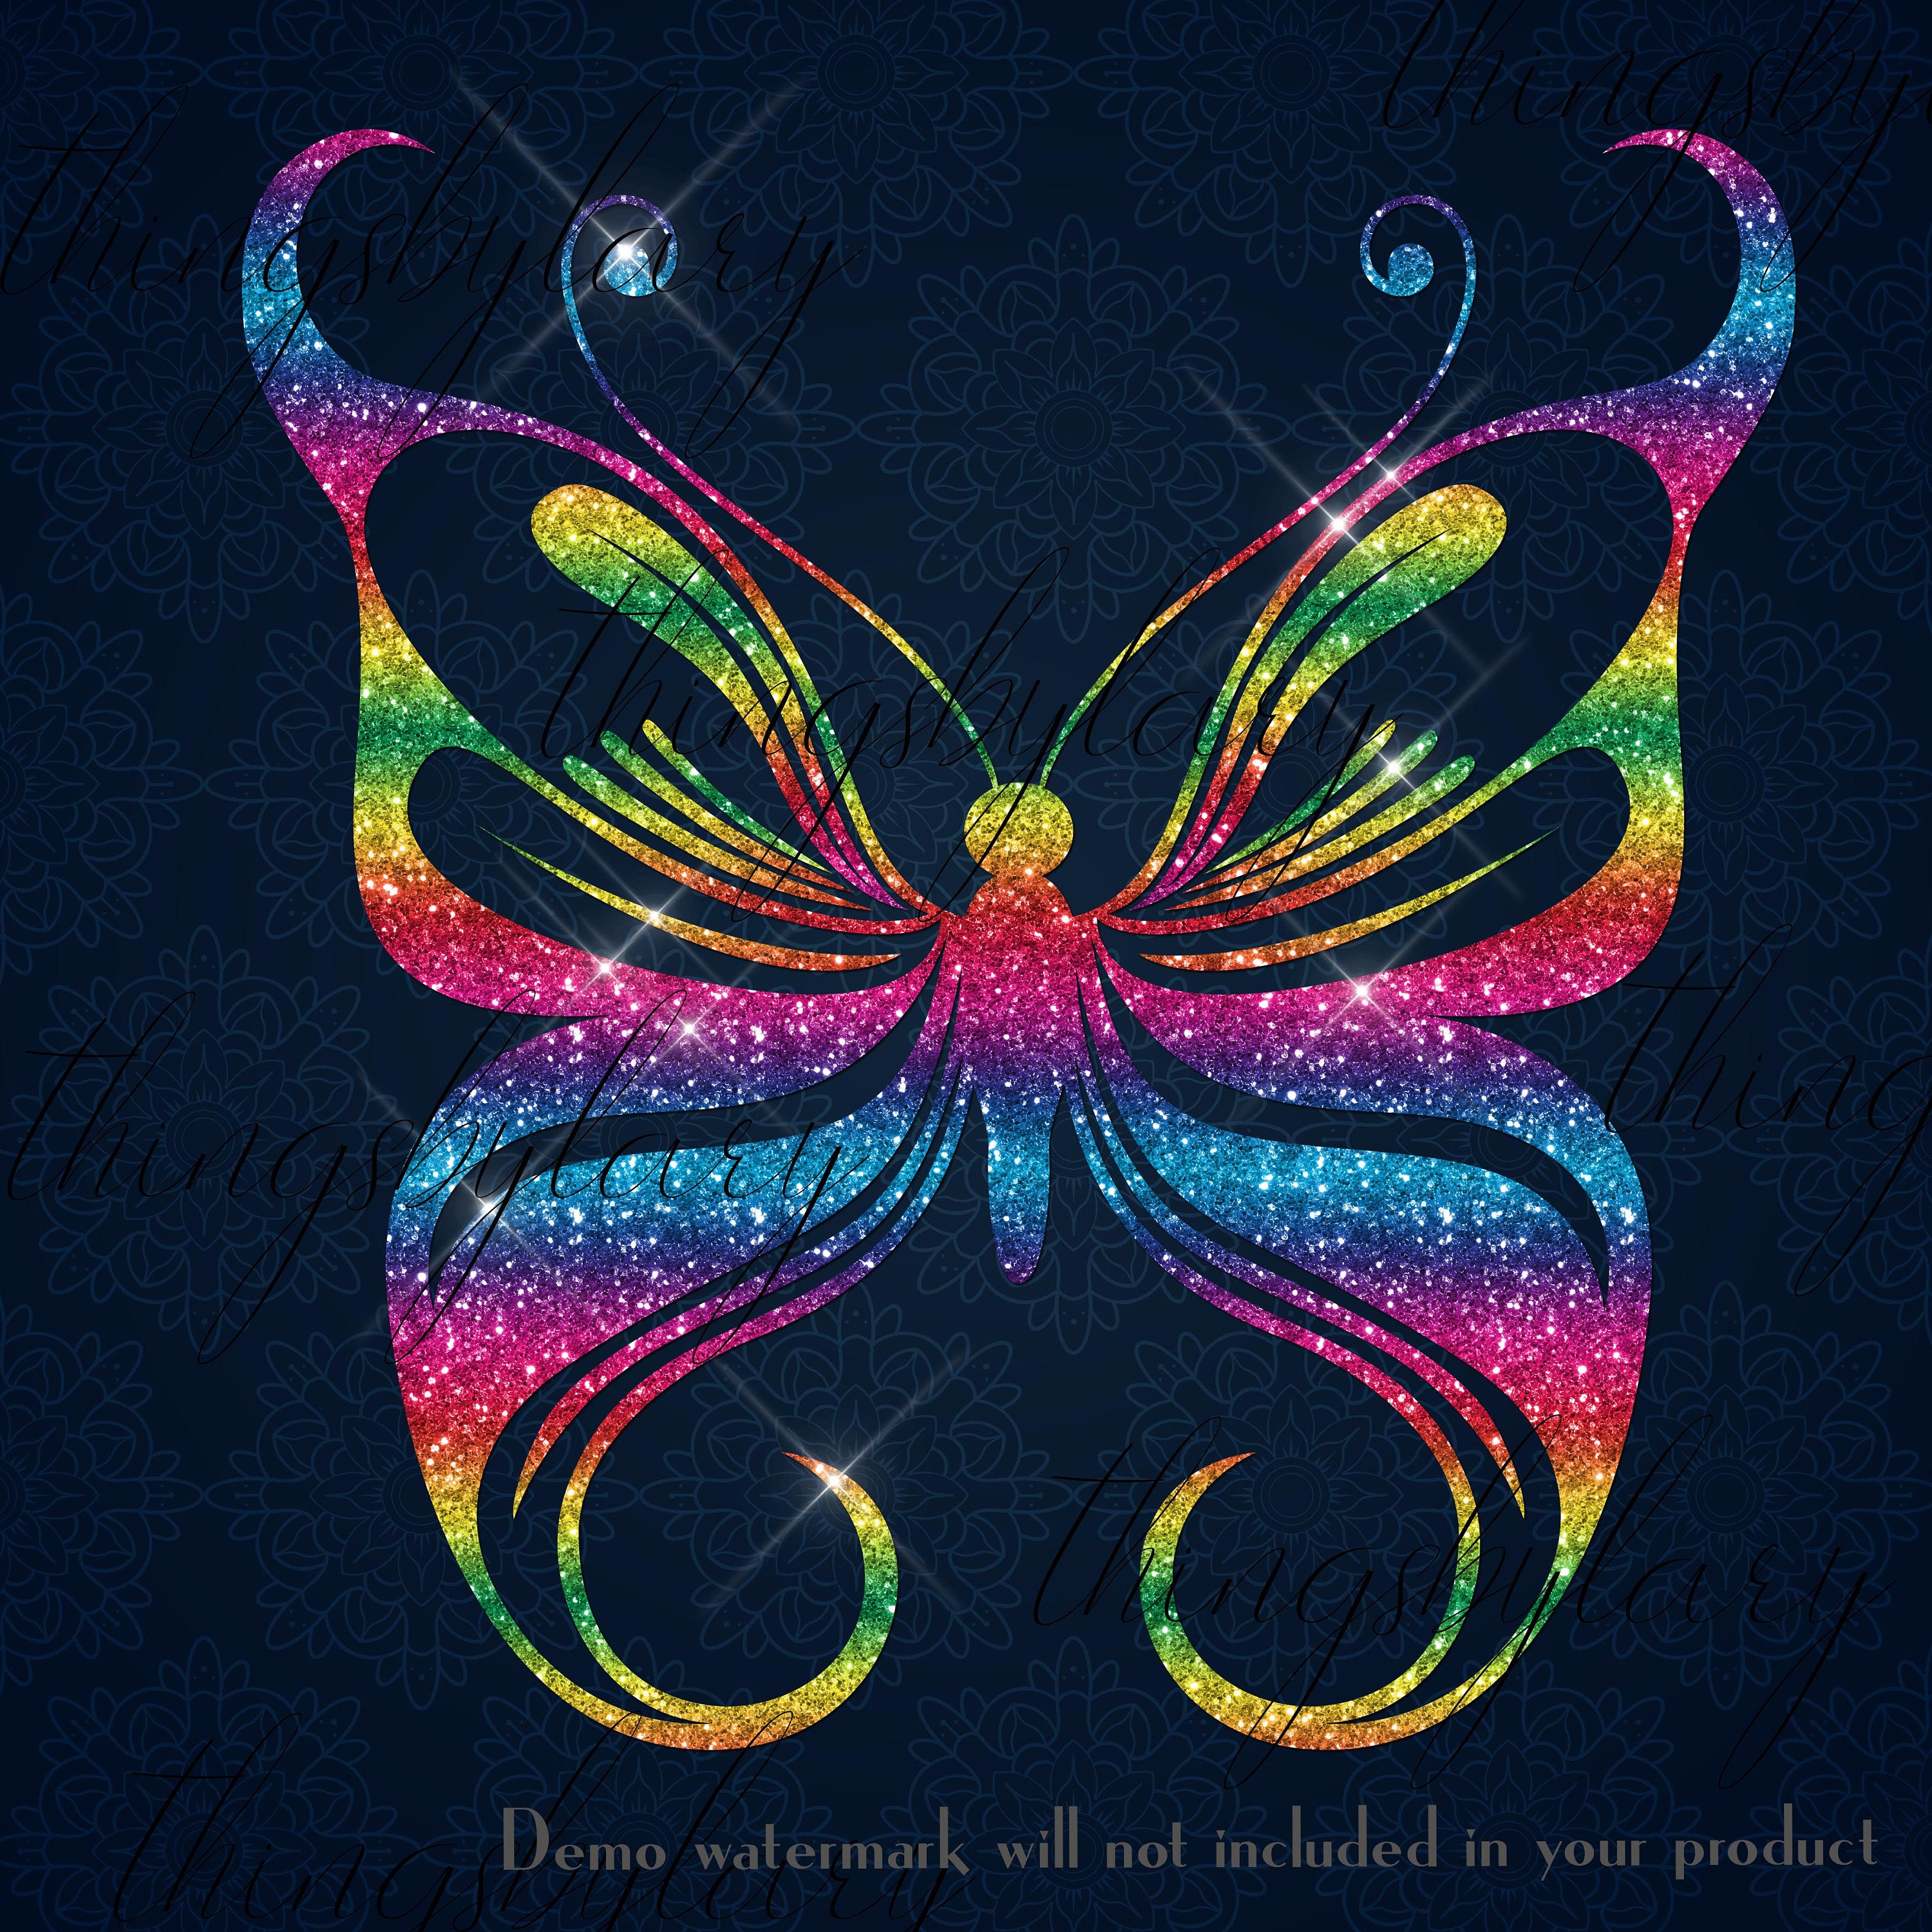 30 Rainbow Glitter & Watercolor Butterfly Clip Arts 300 Dpi Instant Download Commercial Use Transparent Sequin Fairy Magical wing colorful